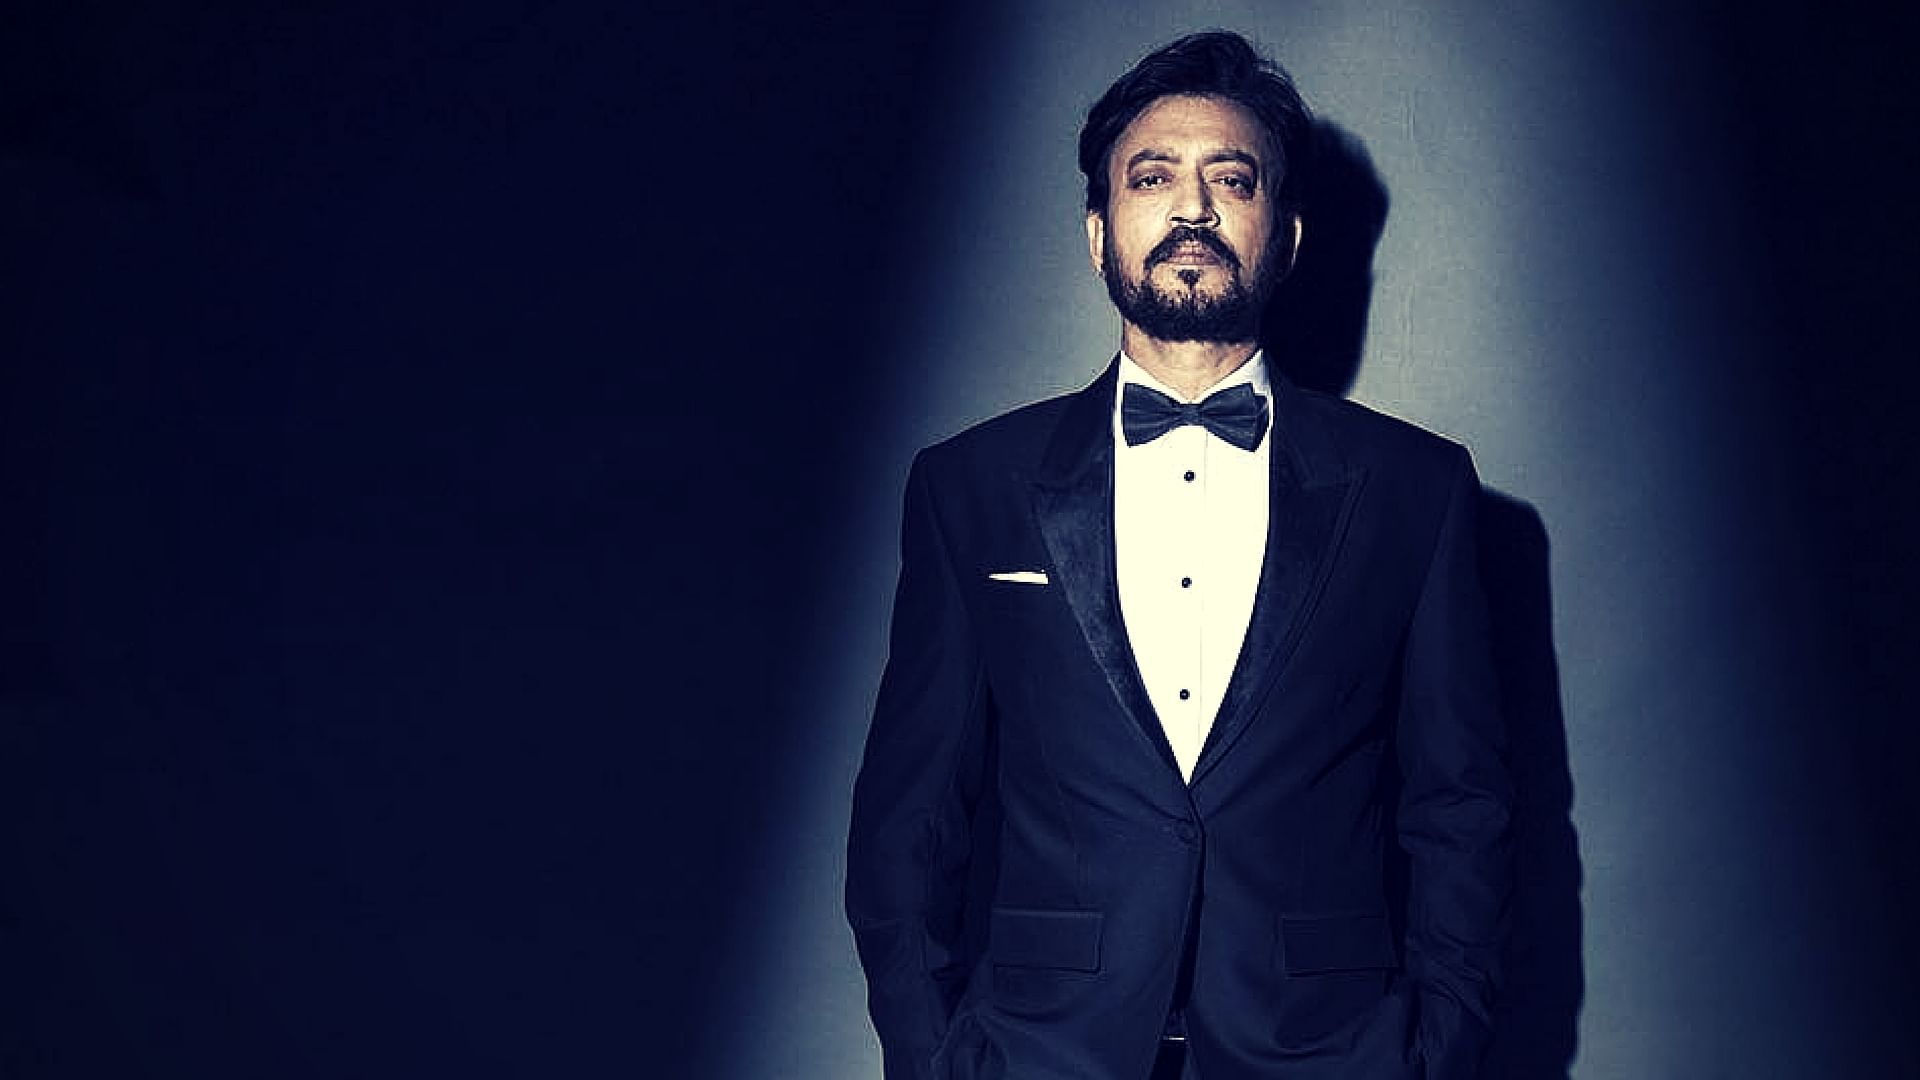 Irrfan Khan has been diagnosed with neuroendocrine tumour.